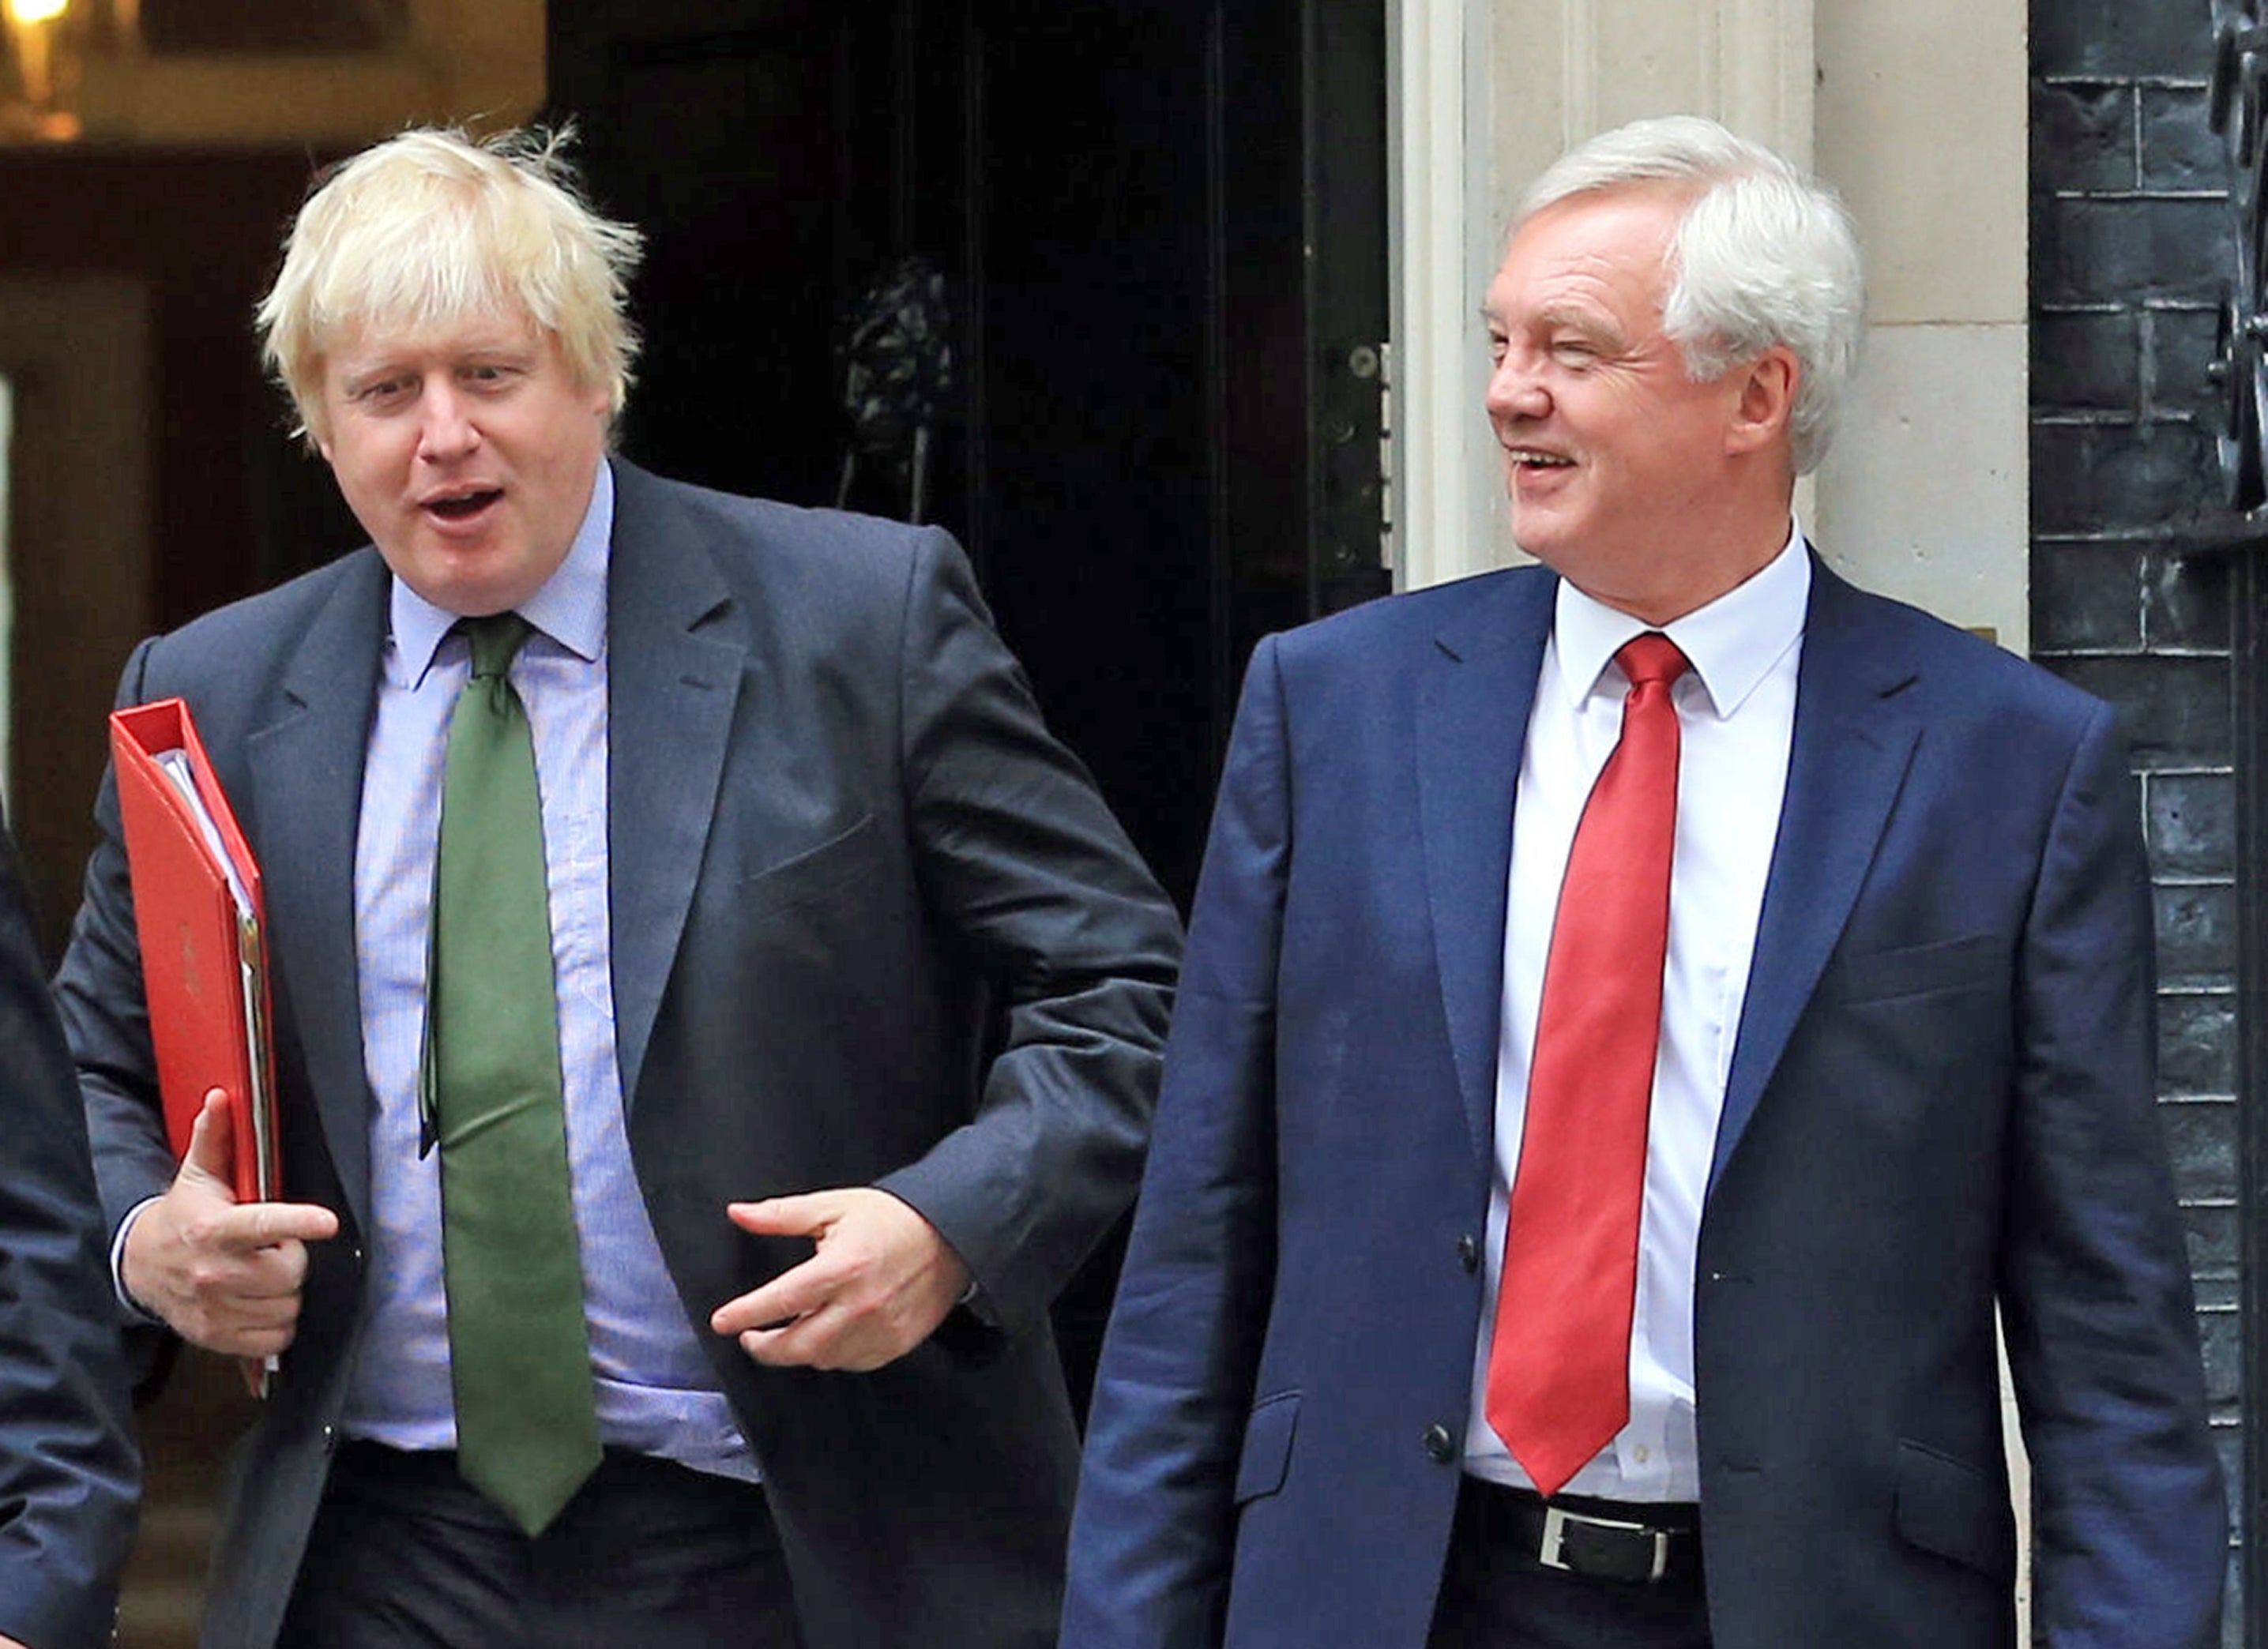 David Davis said he had not changed his mind after calling for Boris Johnson to resign in January